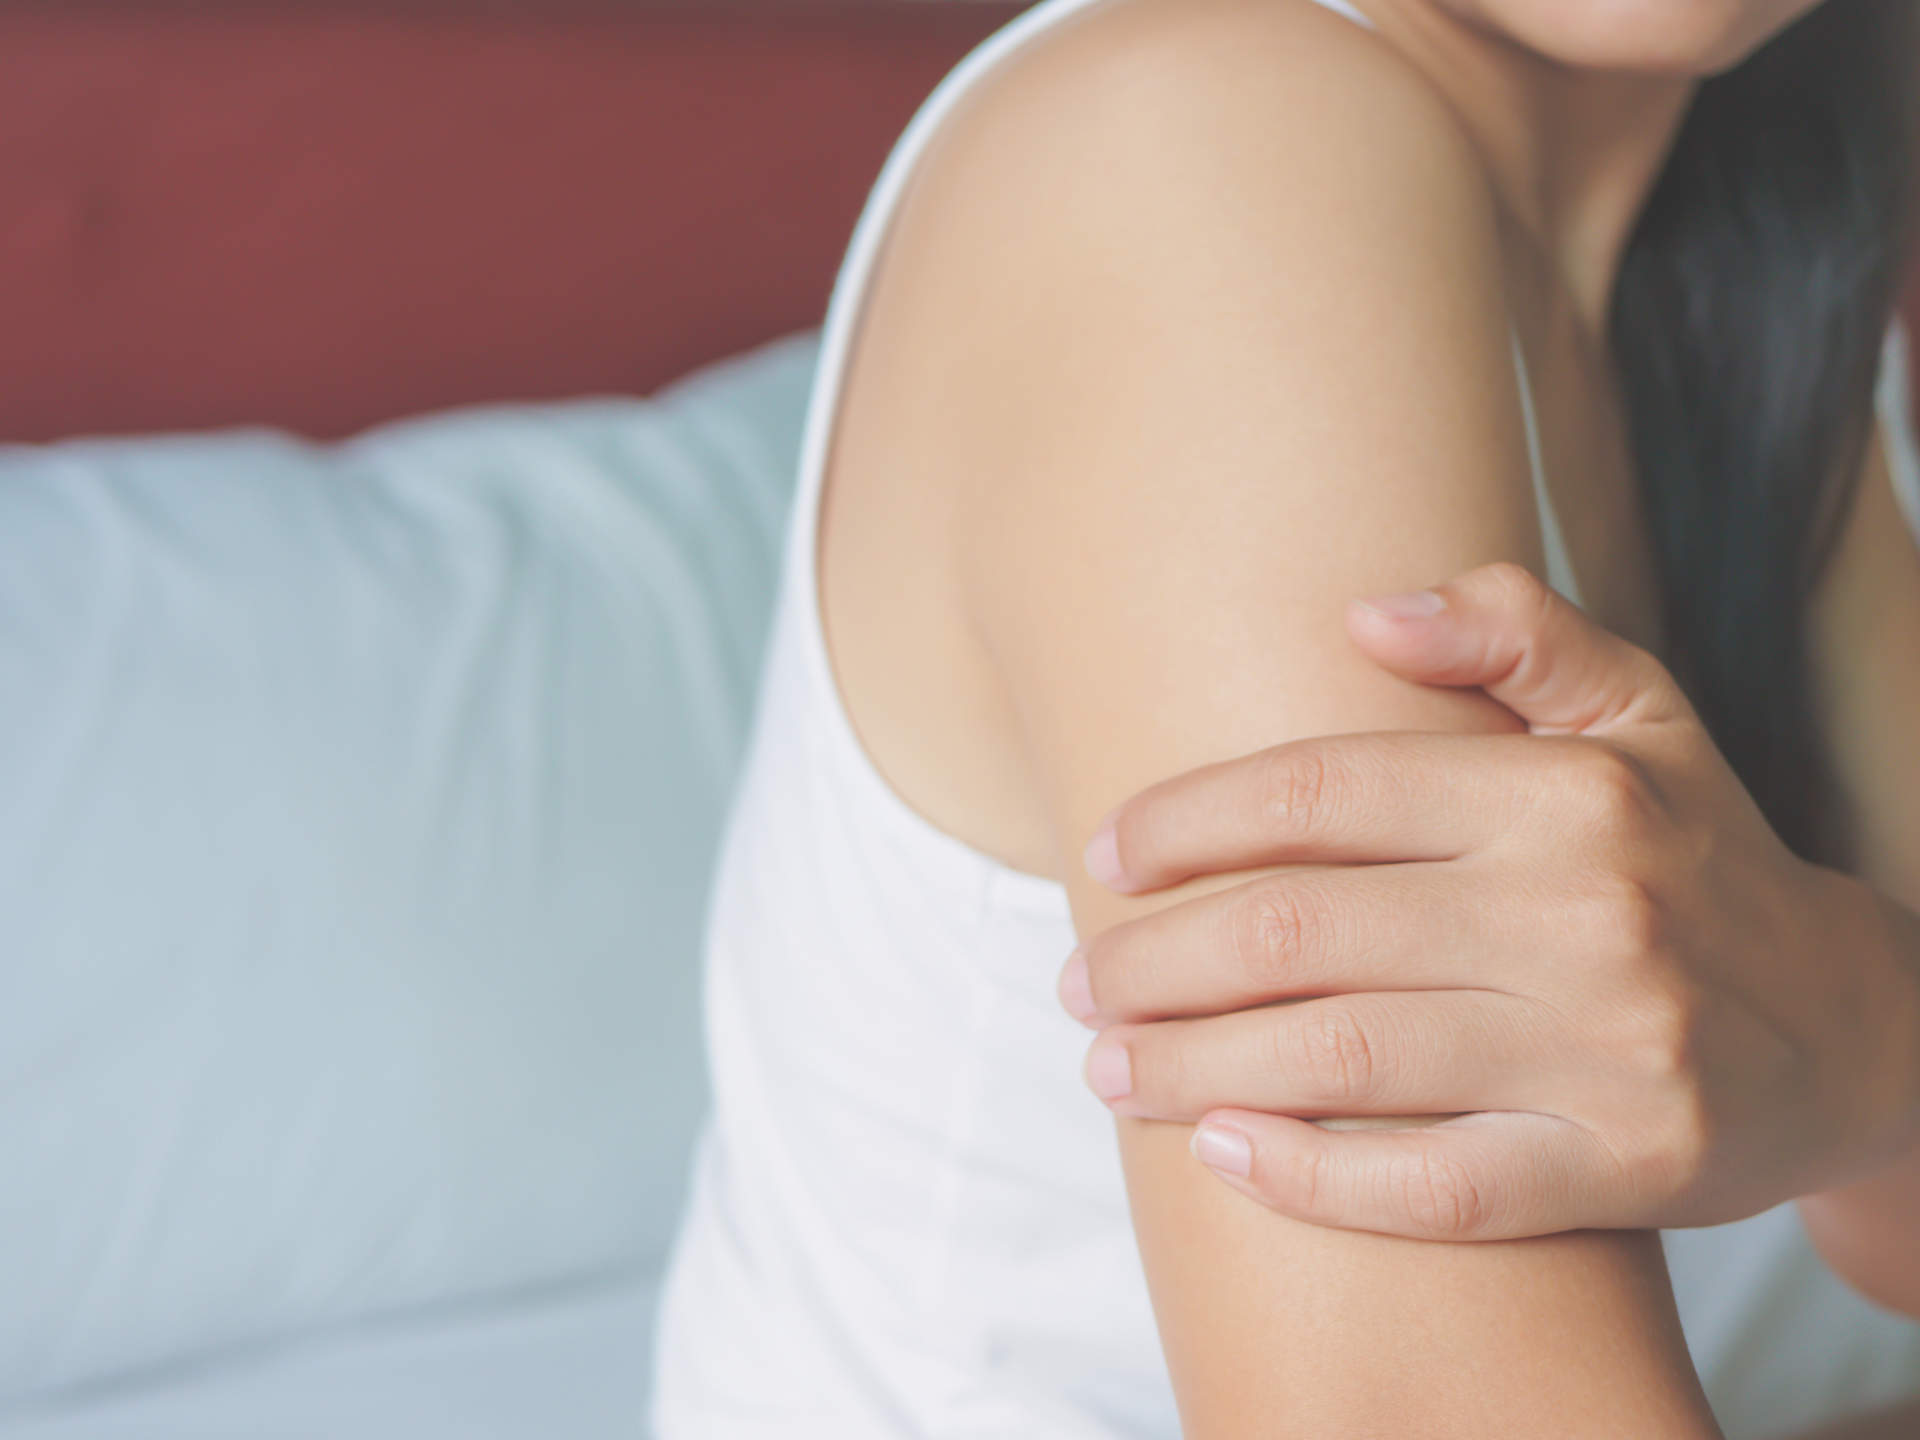 Unhappy woman suffering from painful feeling in arm muscle